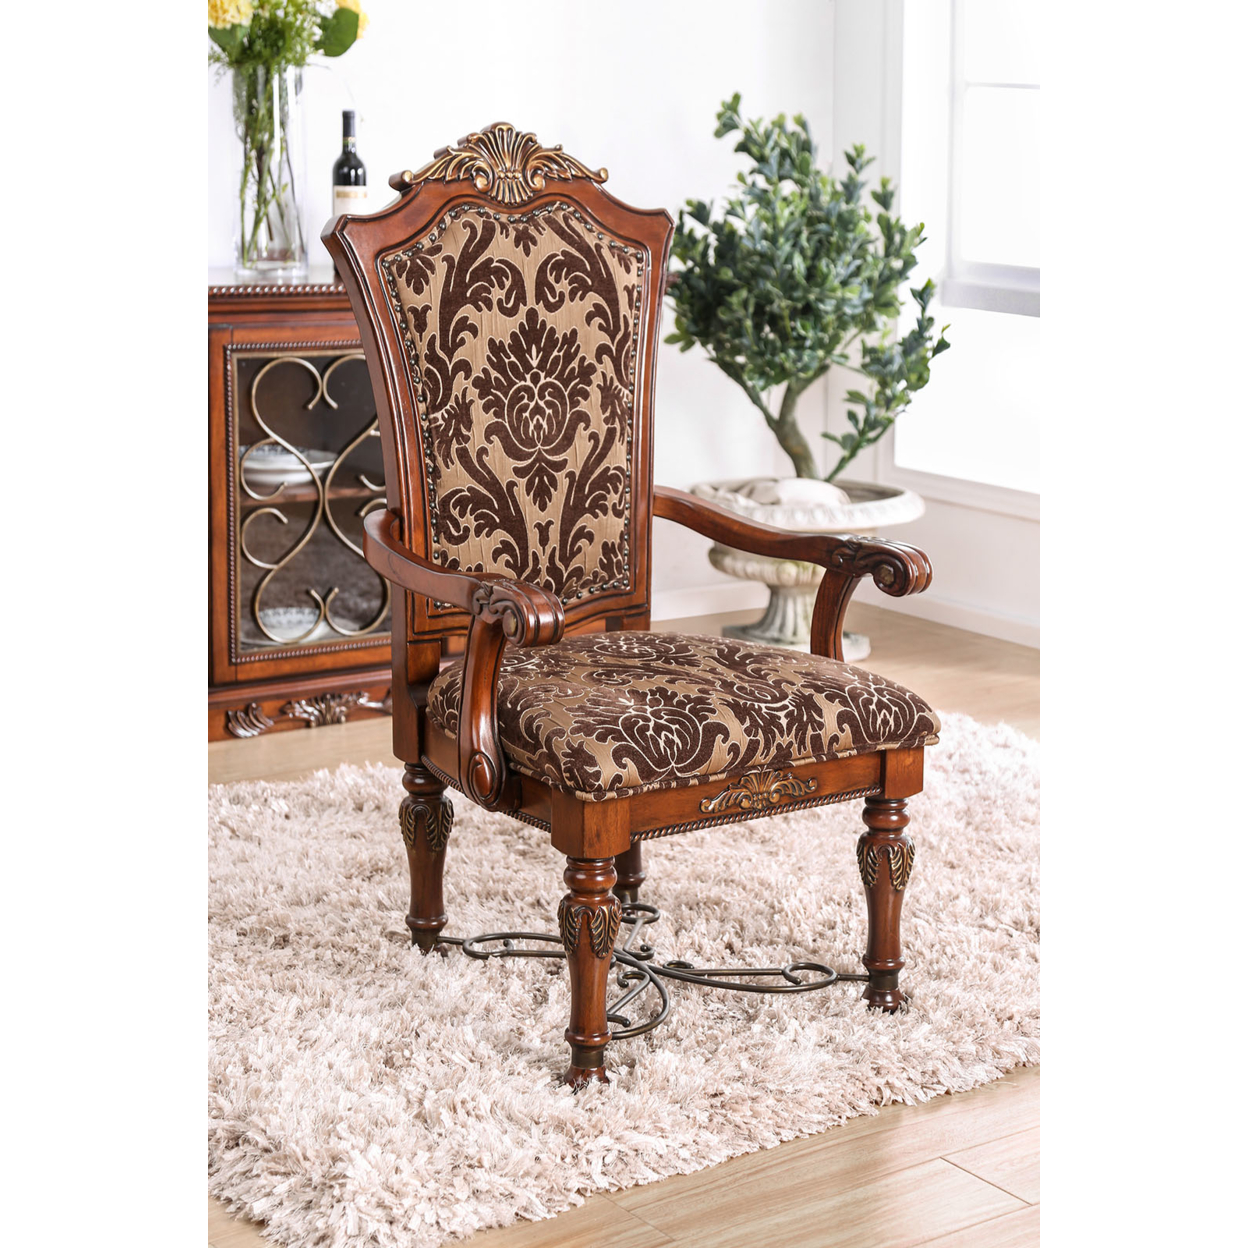 Floral Print Fabric Upholstered Arm Chair In Wood, Cherry Brown, Set Of 2- Saltoro Sherpi